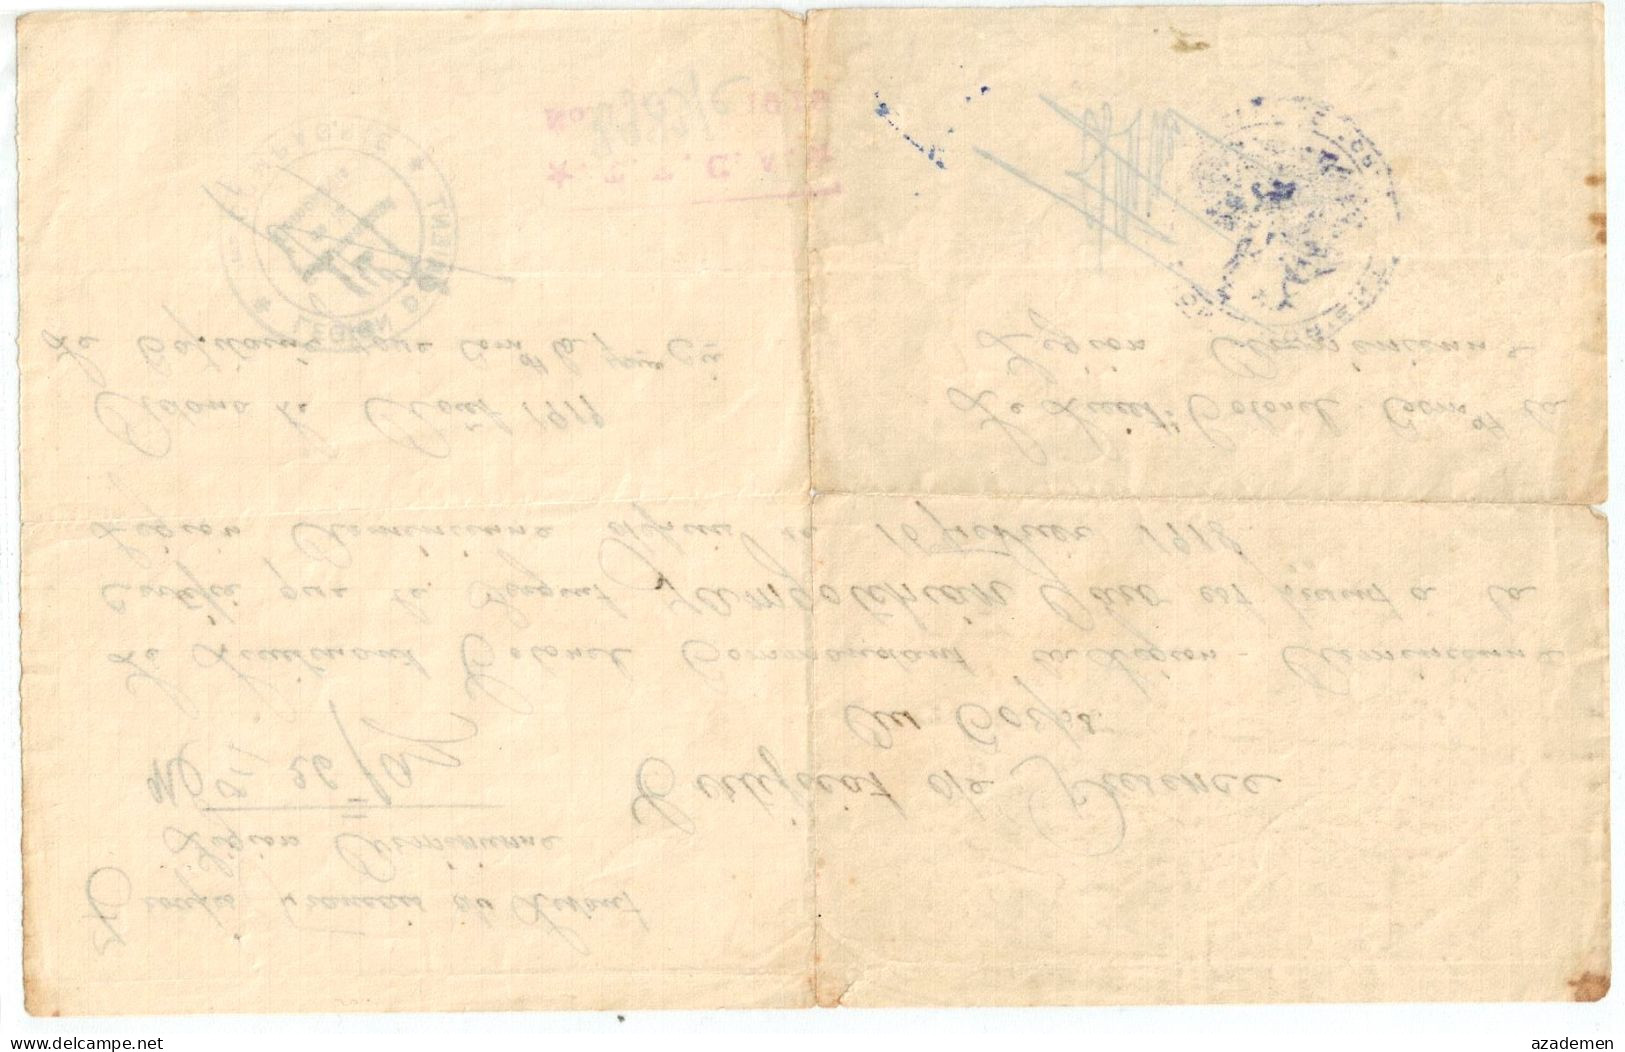 CILICIE  1919  LEGION ARMENIENNE. - Covers & Documents